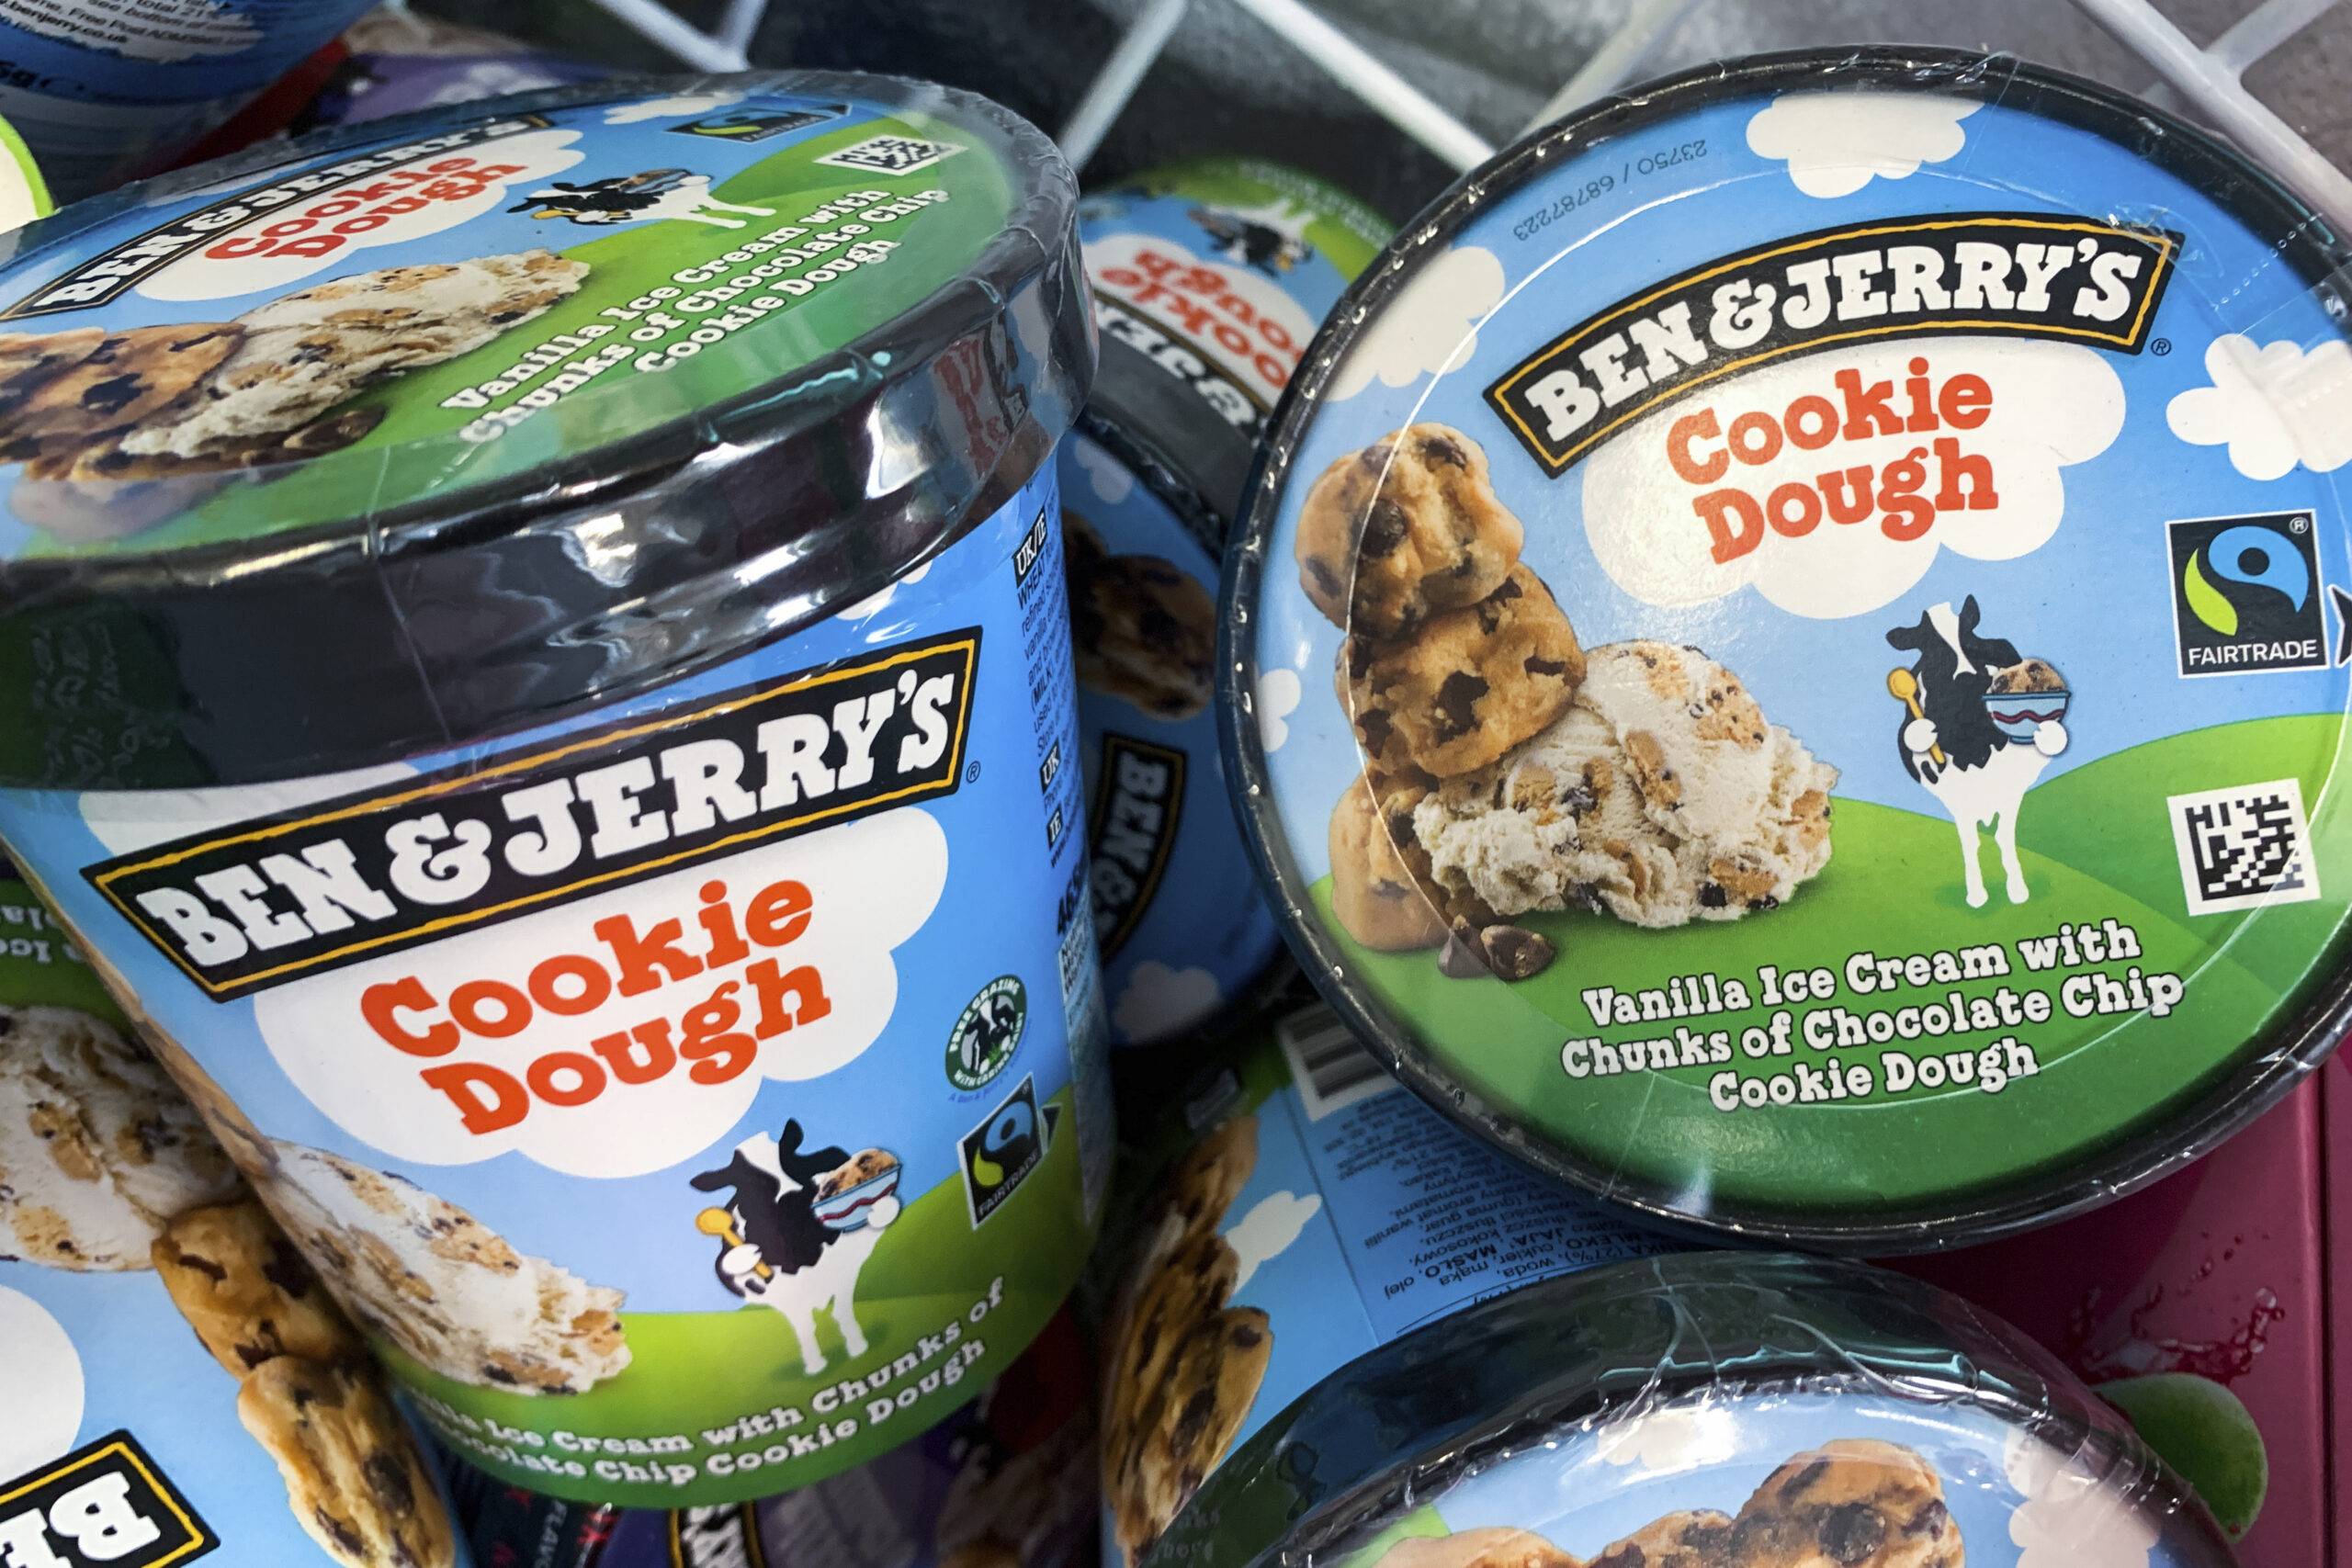 Ben & Jerry’s Release July 4 Message Calling for ‘Stolen Indigenous Land’ To Be Returned